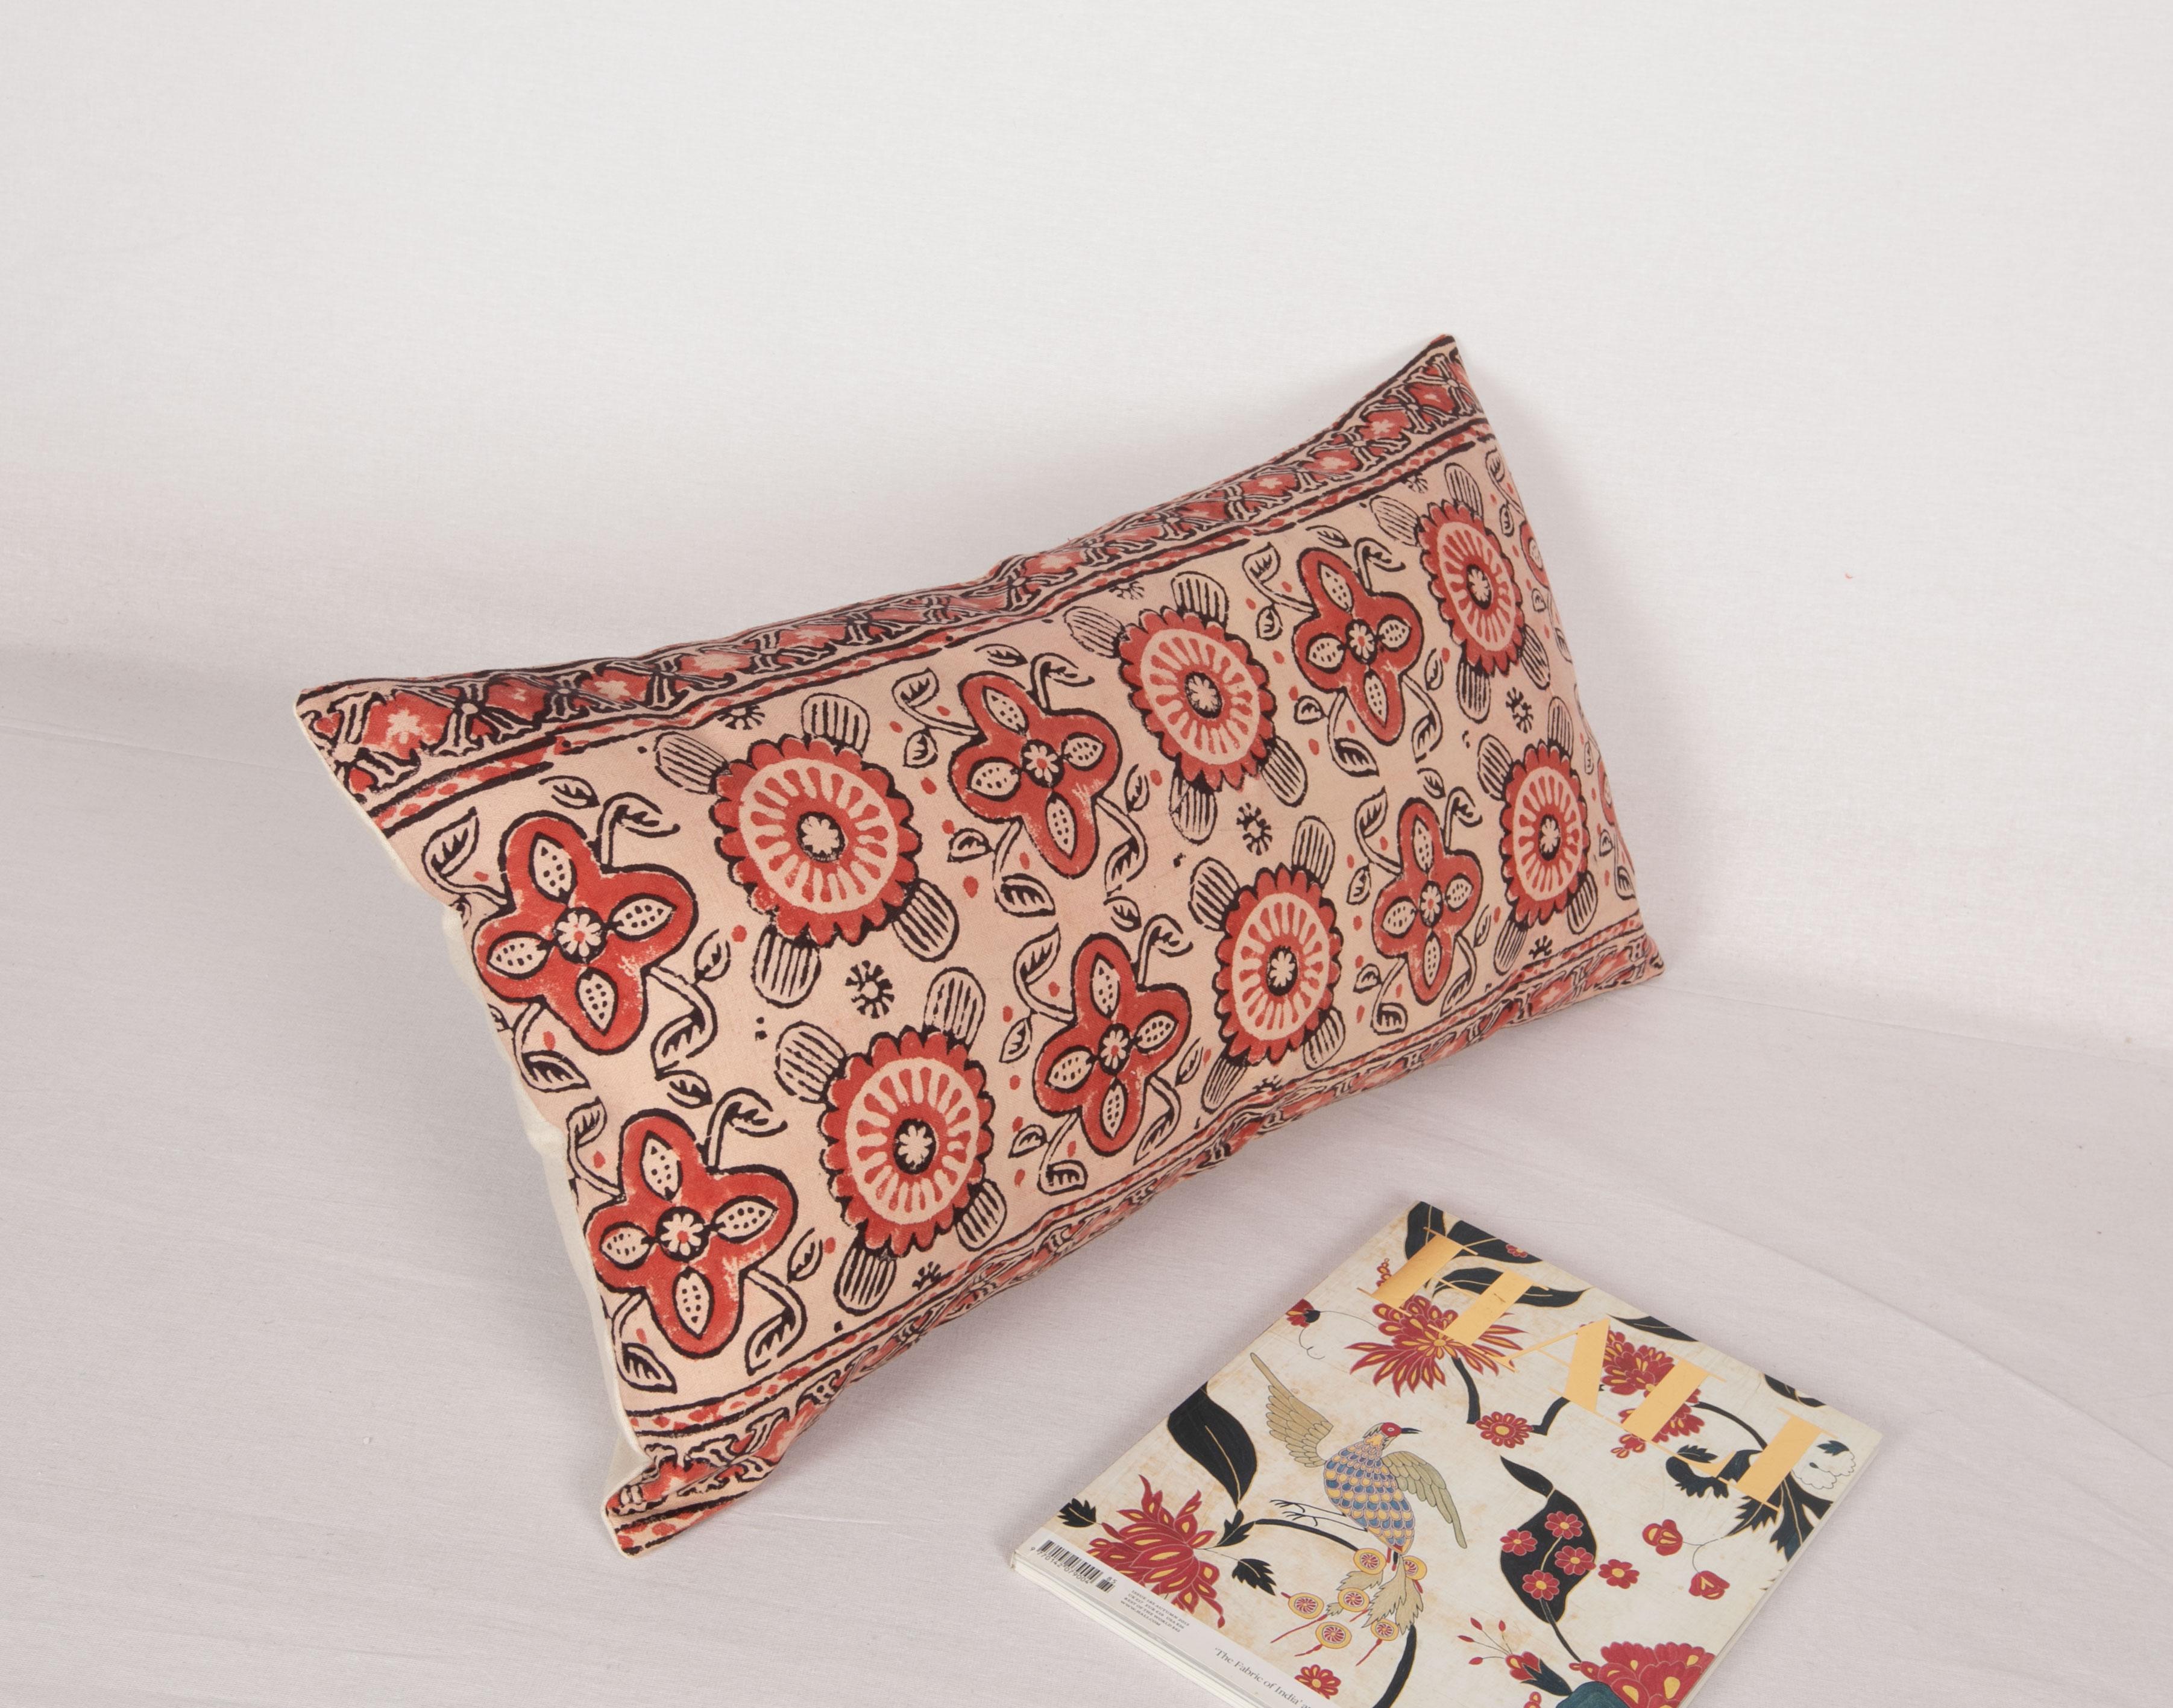 Pillow Case Made from an Uzbek Block Print, Early 20th C For Sale 2